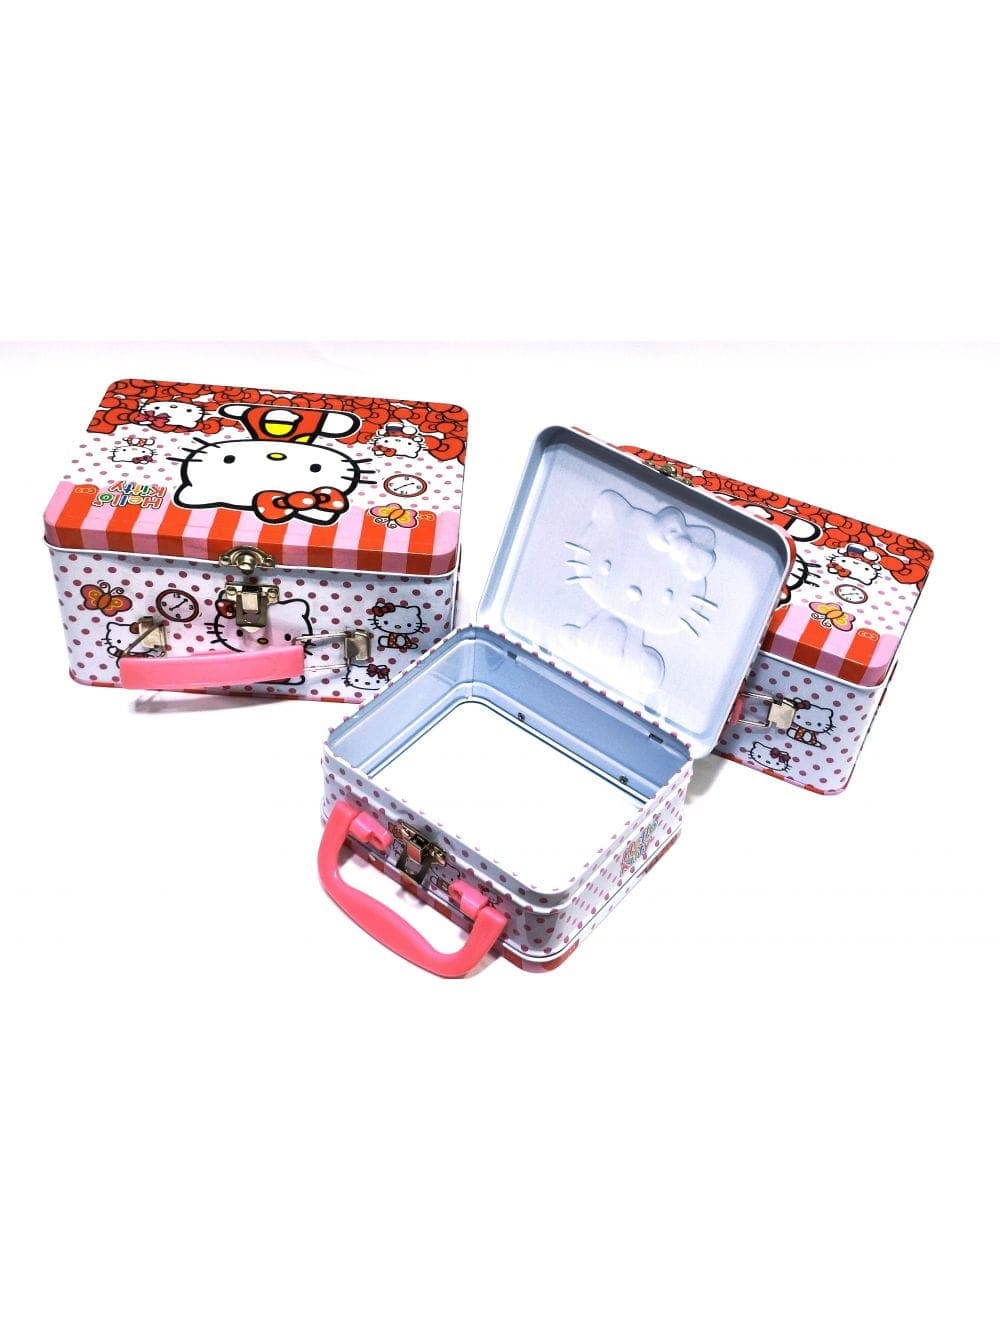 Hello Kitty Smiley Coin Box with Lock 3 in 1